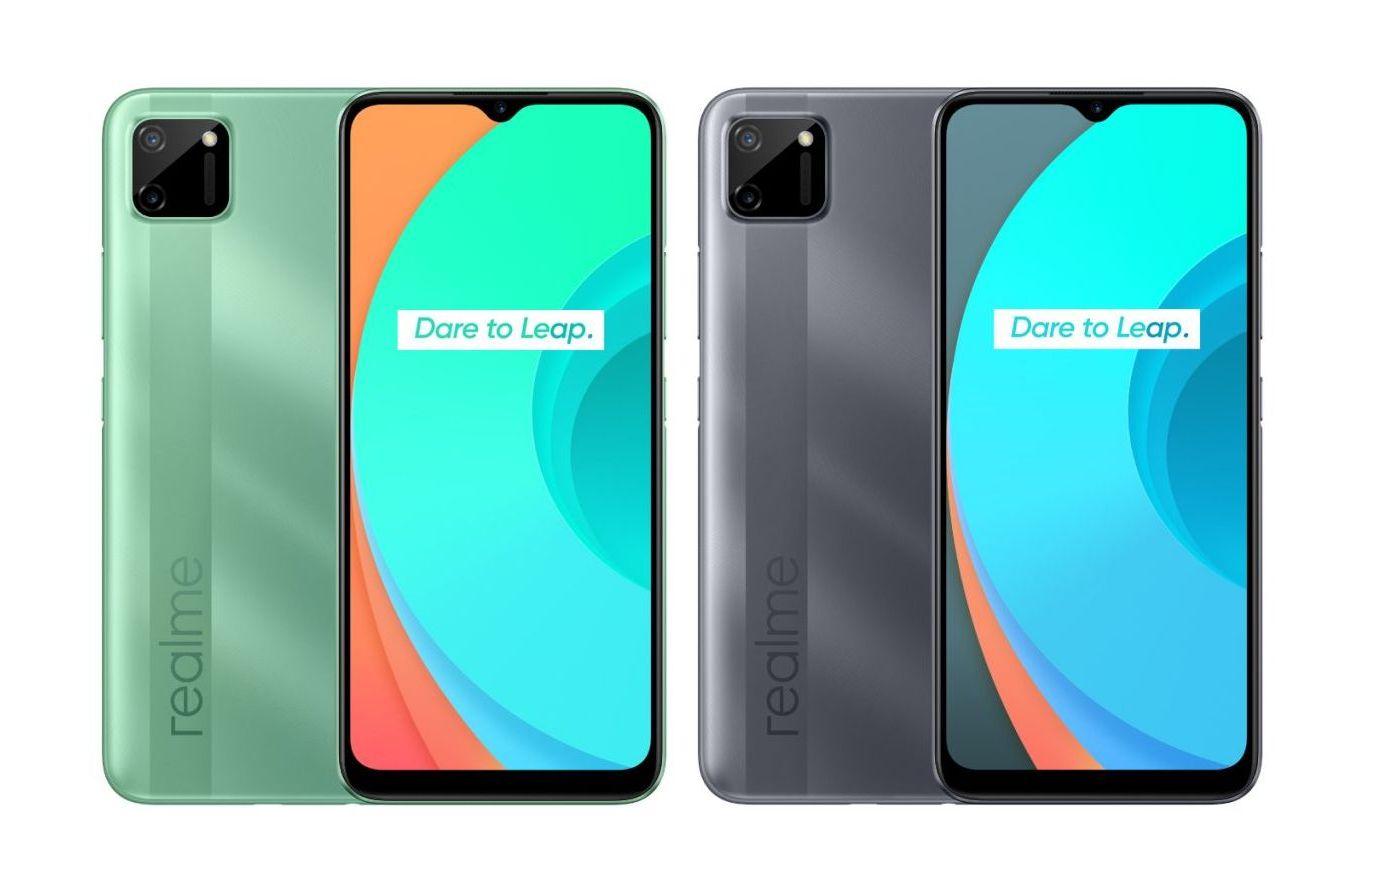 Realme C11 India launch to be held on July 14 - Gizmochina